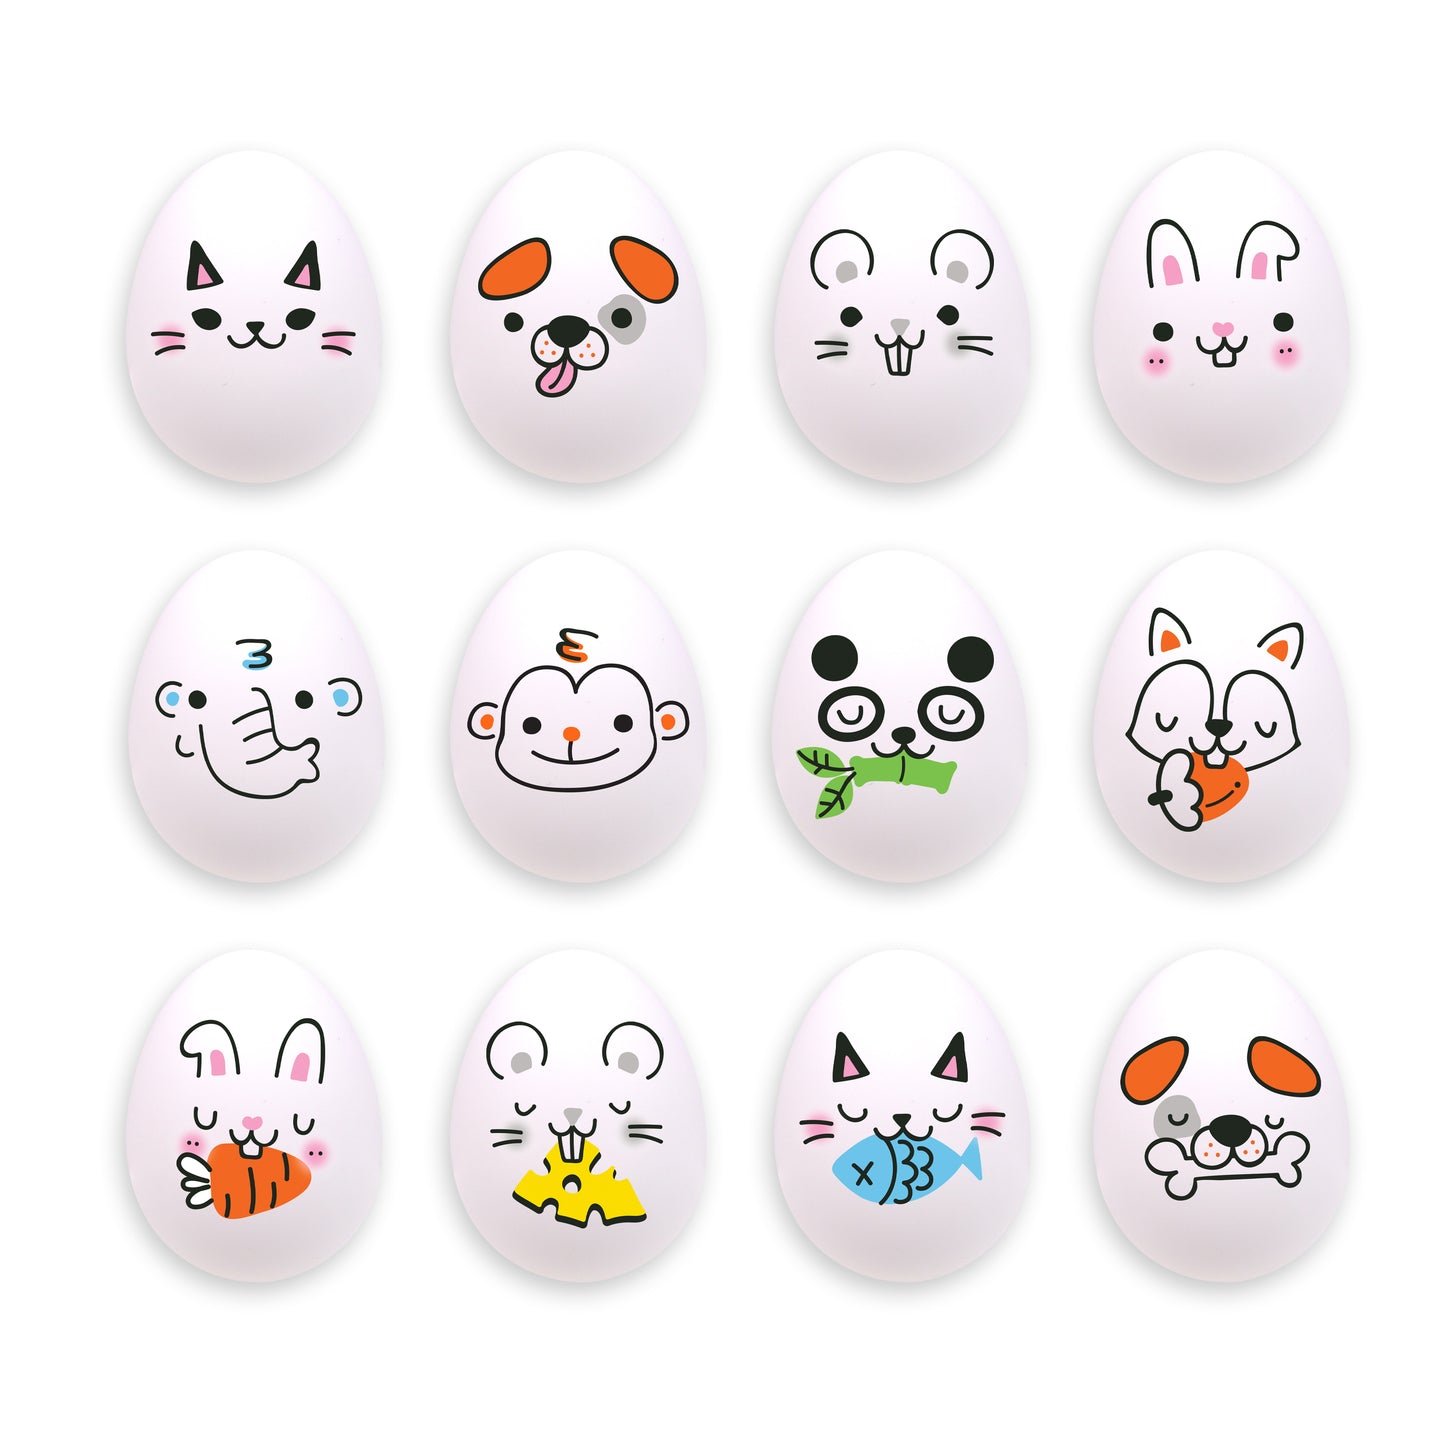 Load image into Gallery viewer, Mushimoto Squishy Mini Eggie - 6 Pack
